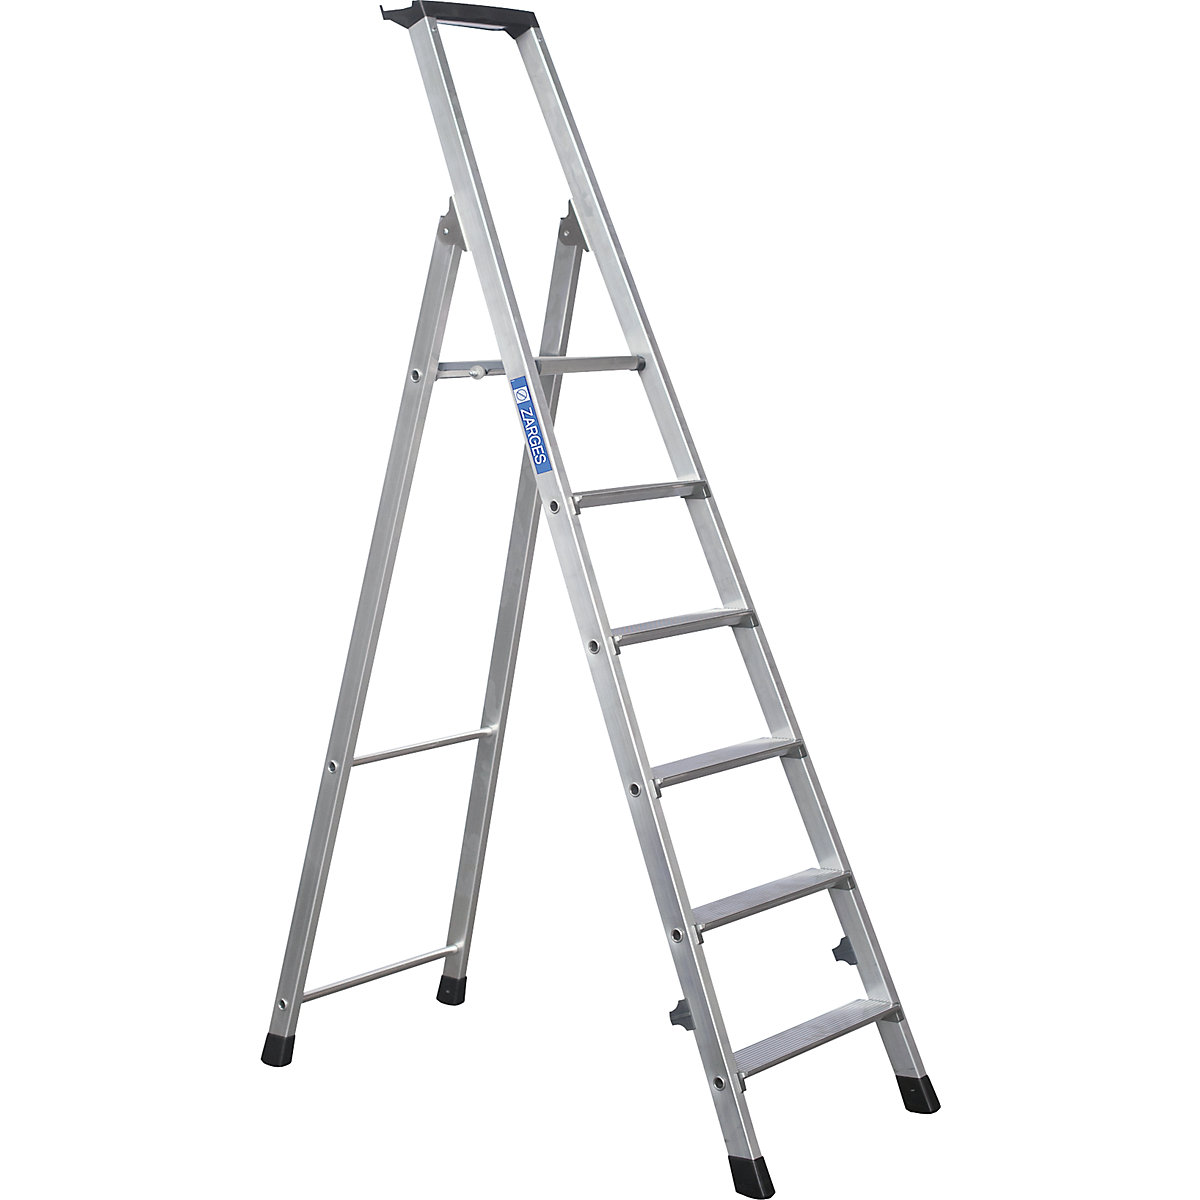 Folding step ladder, single sided access – ZARGES, with storage tray, for light use, 6 steps incl. platform-1